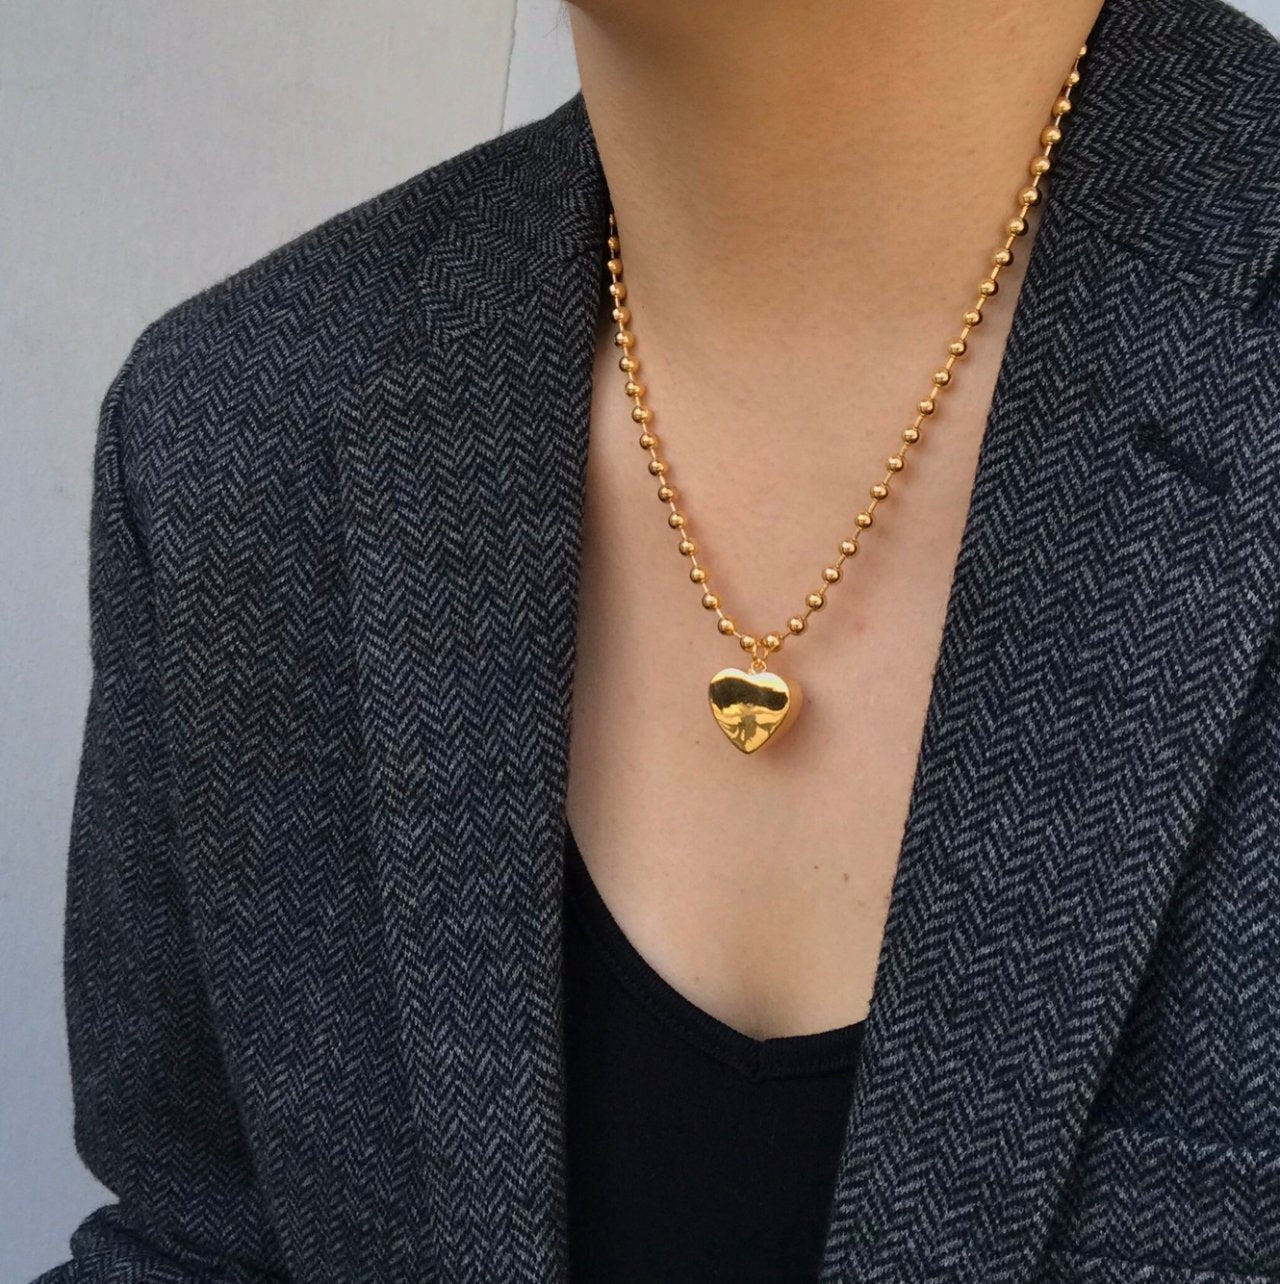 Cleef Necklace X Heart Pendant in Gold